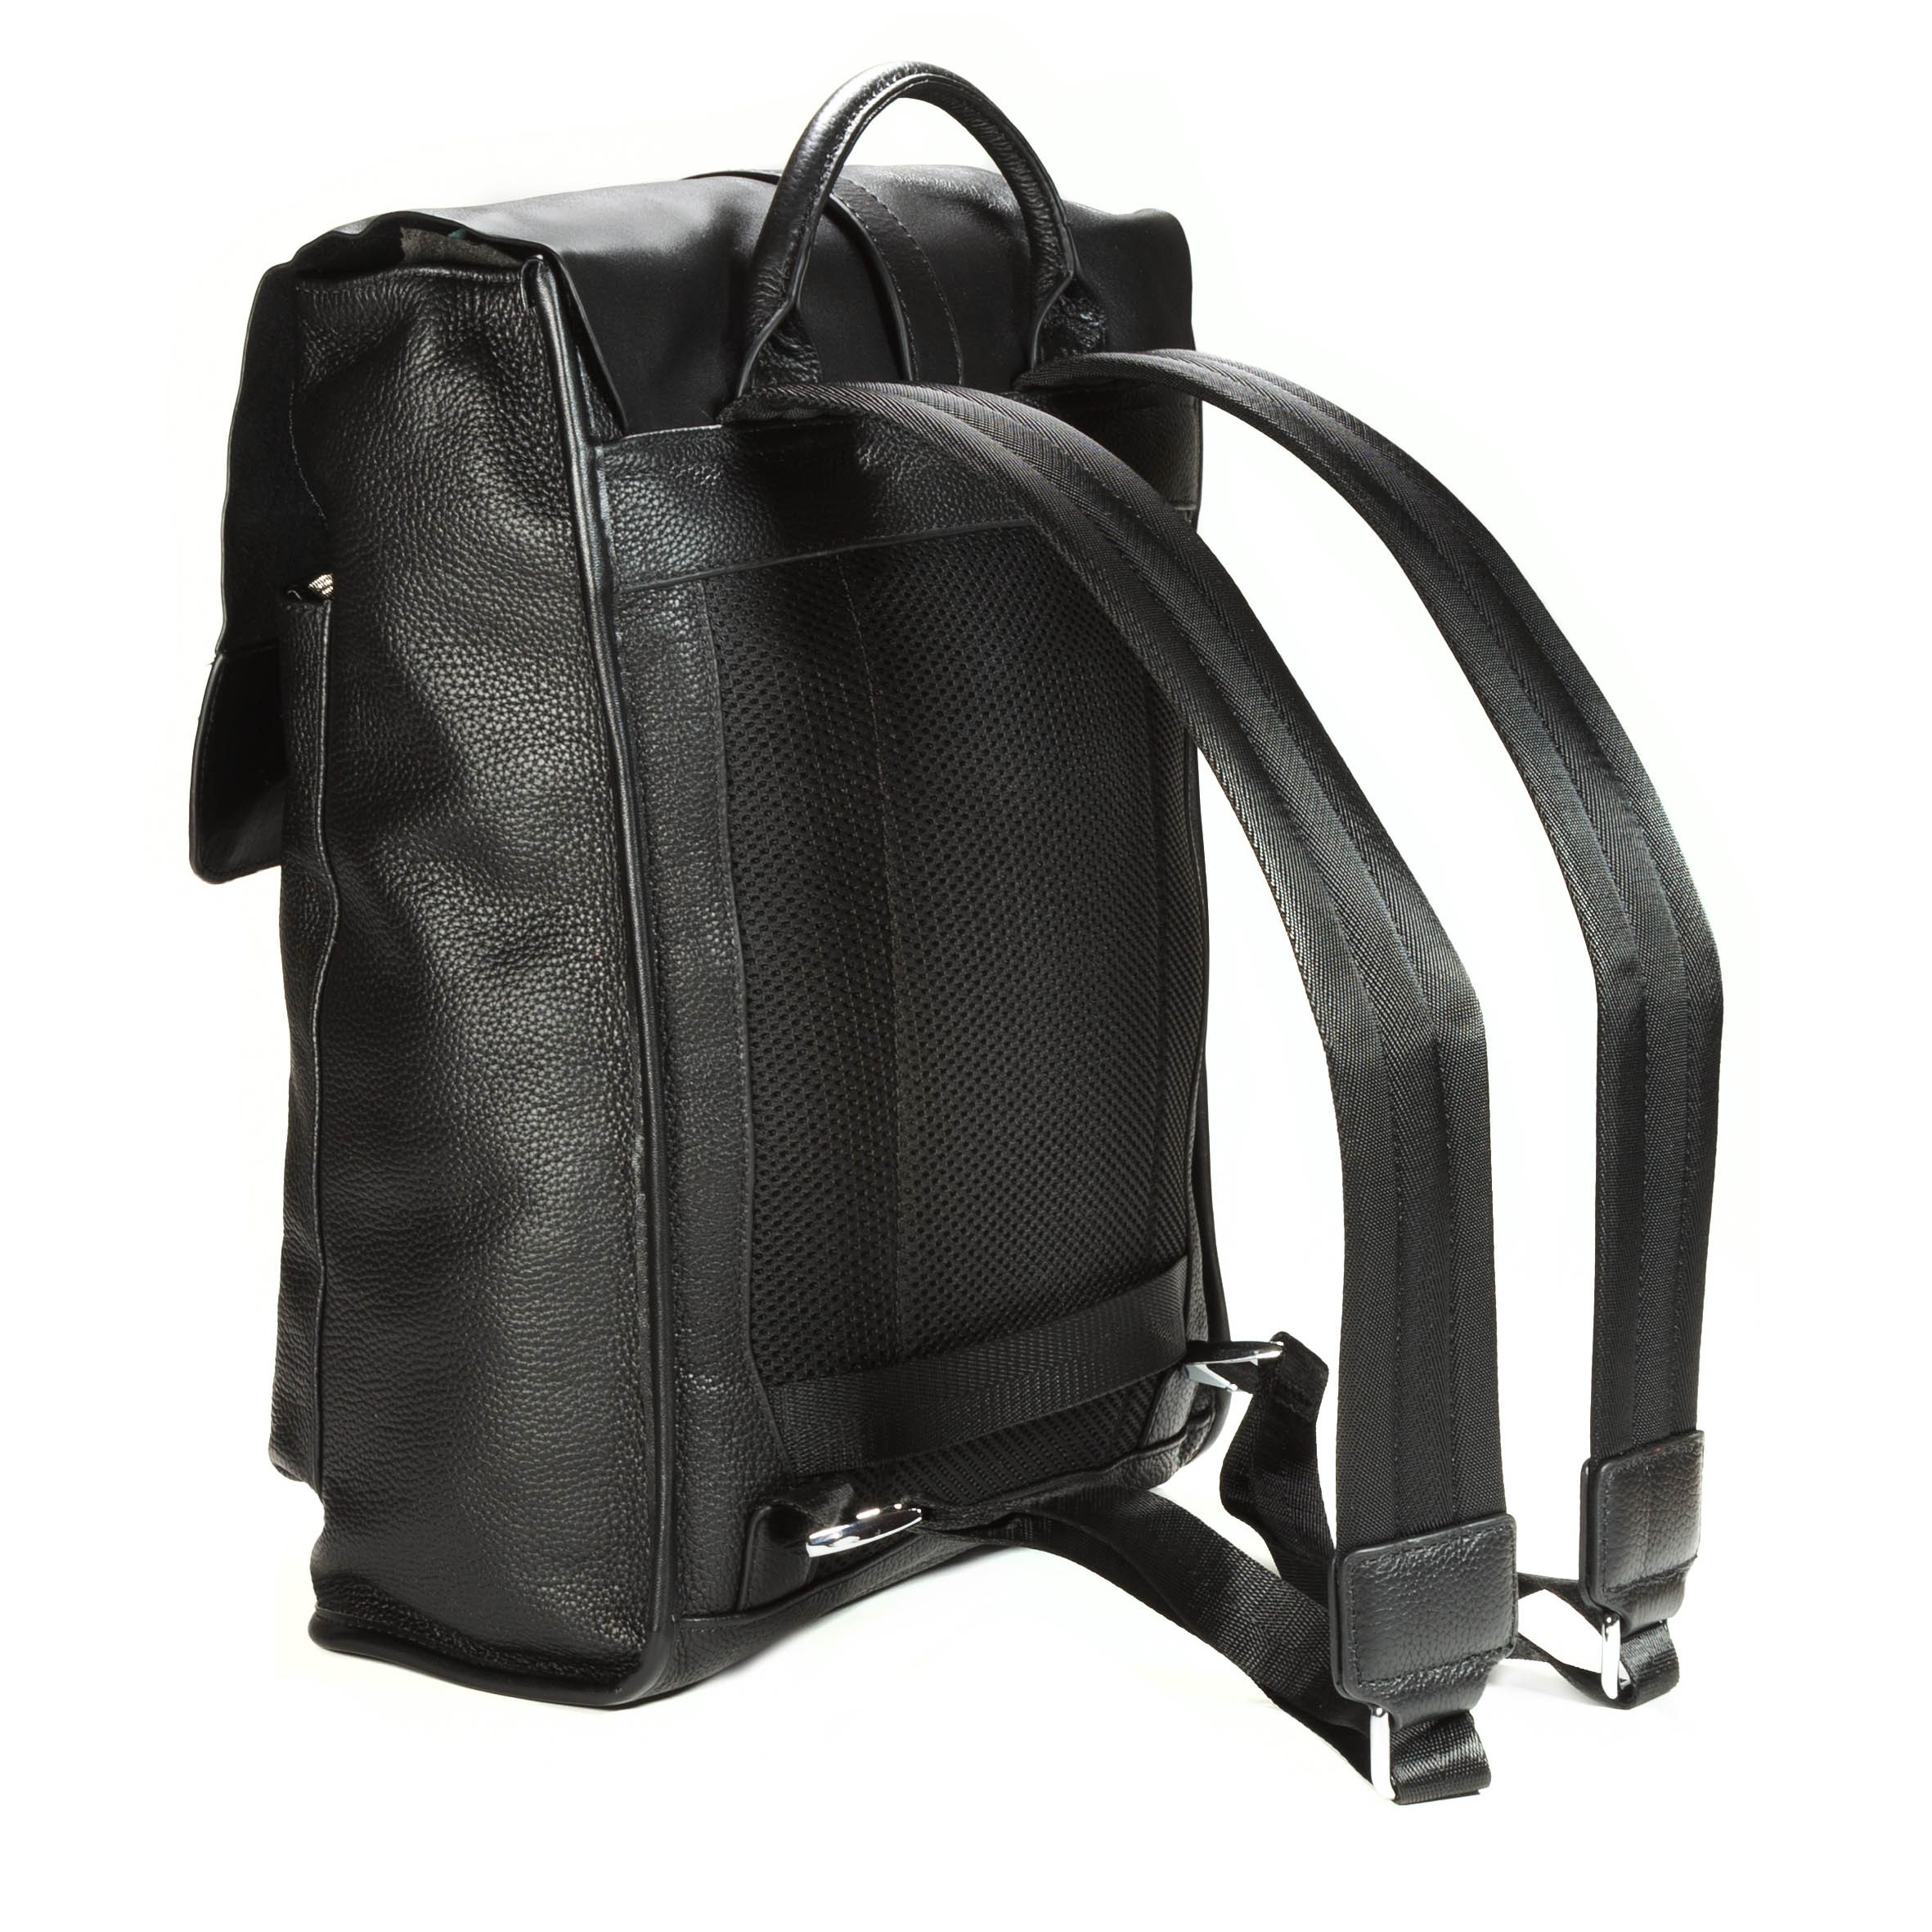 Falcon Leather Structured Backpack - FI6716 Black - Backpack - Falcon